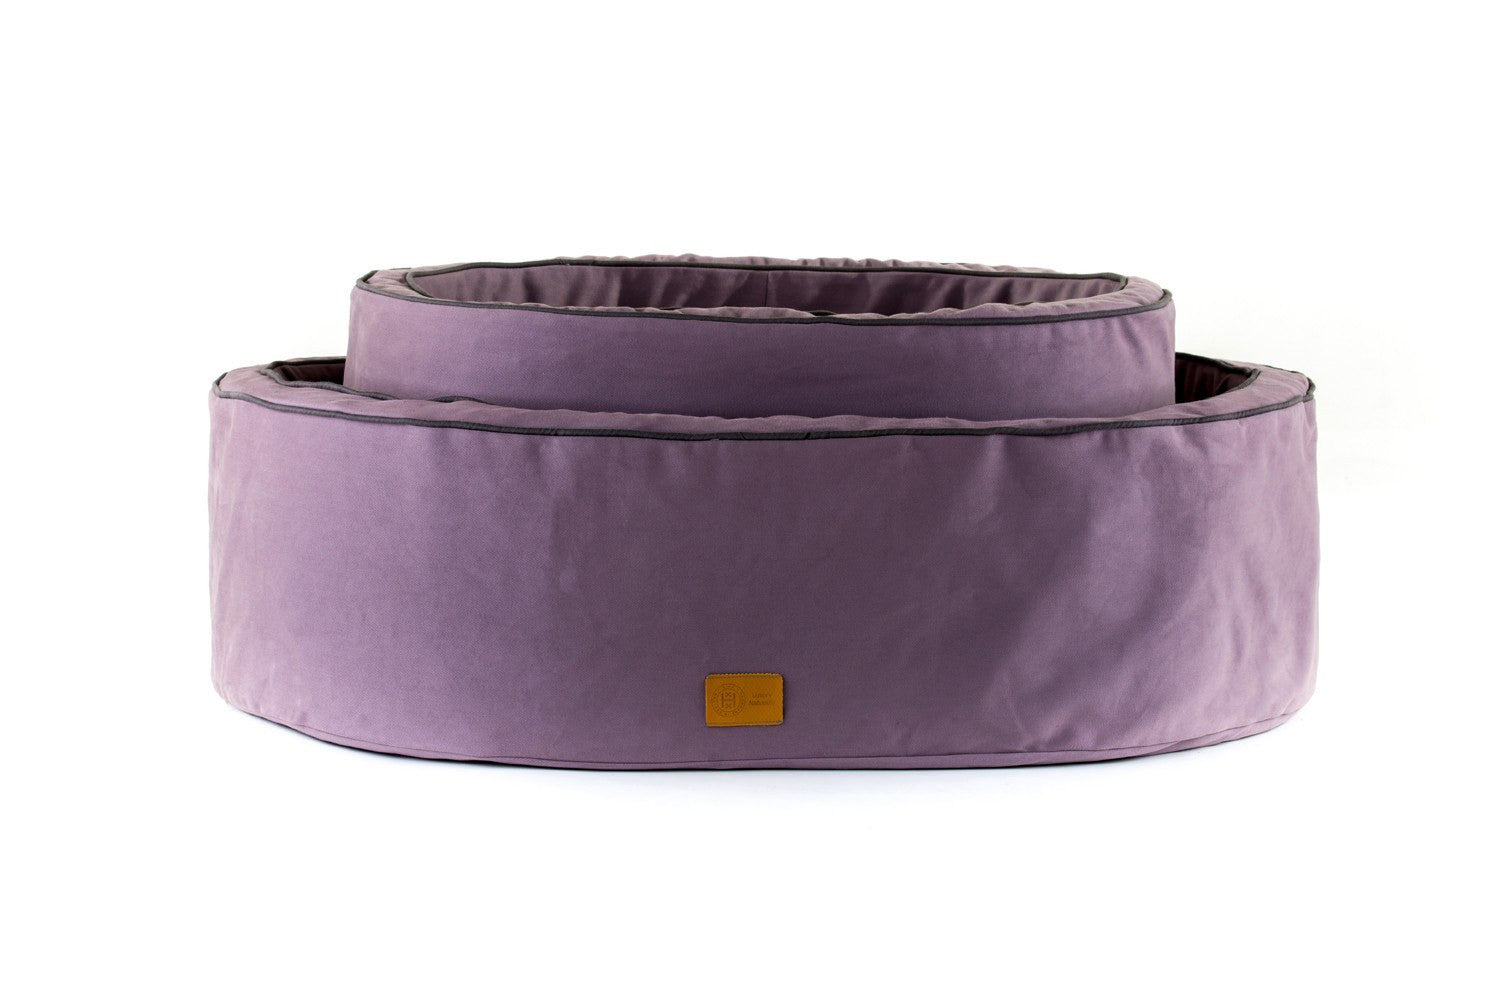 Mauve bull denim cotton natural all season Nest dog bed made from organic materials in Britain.